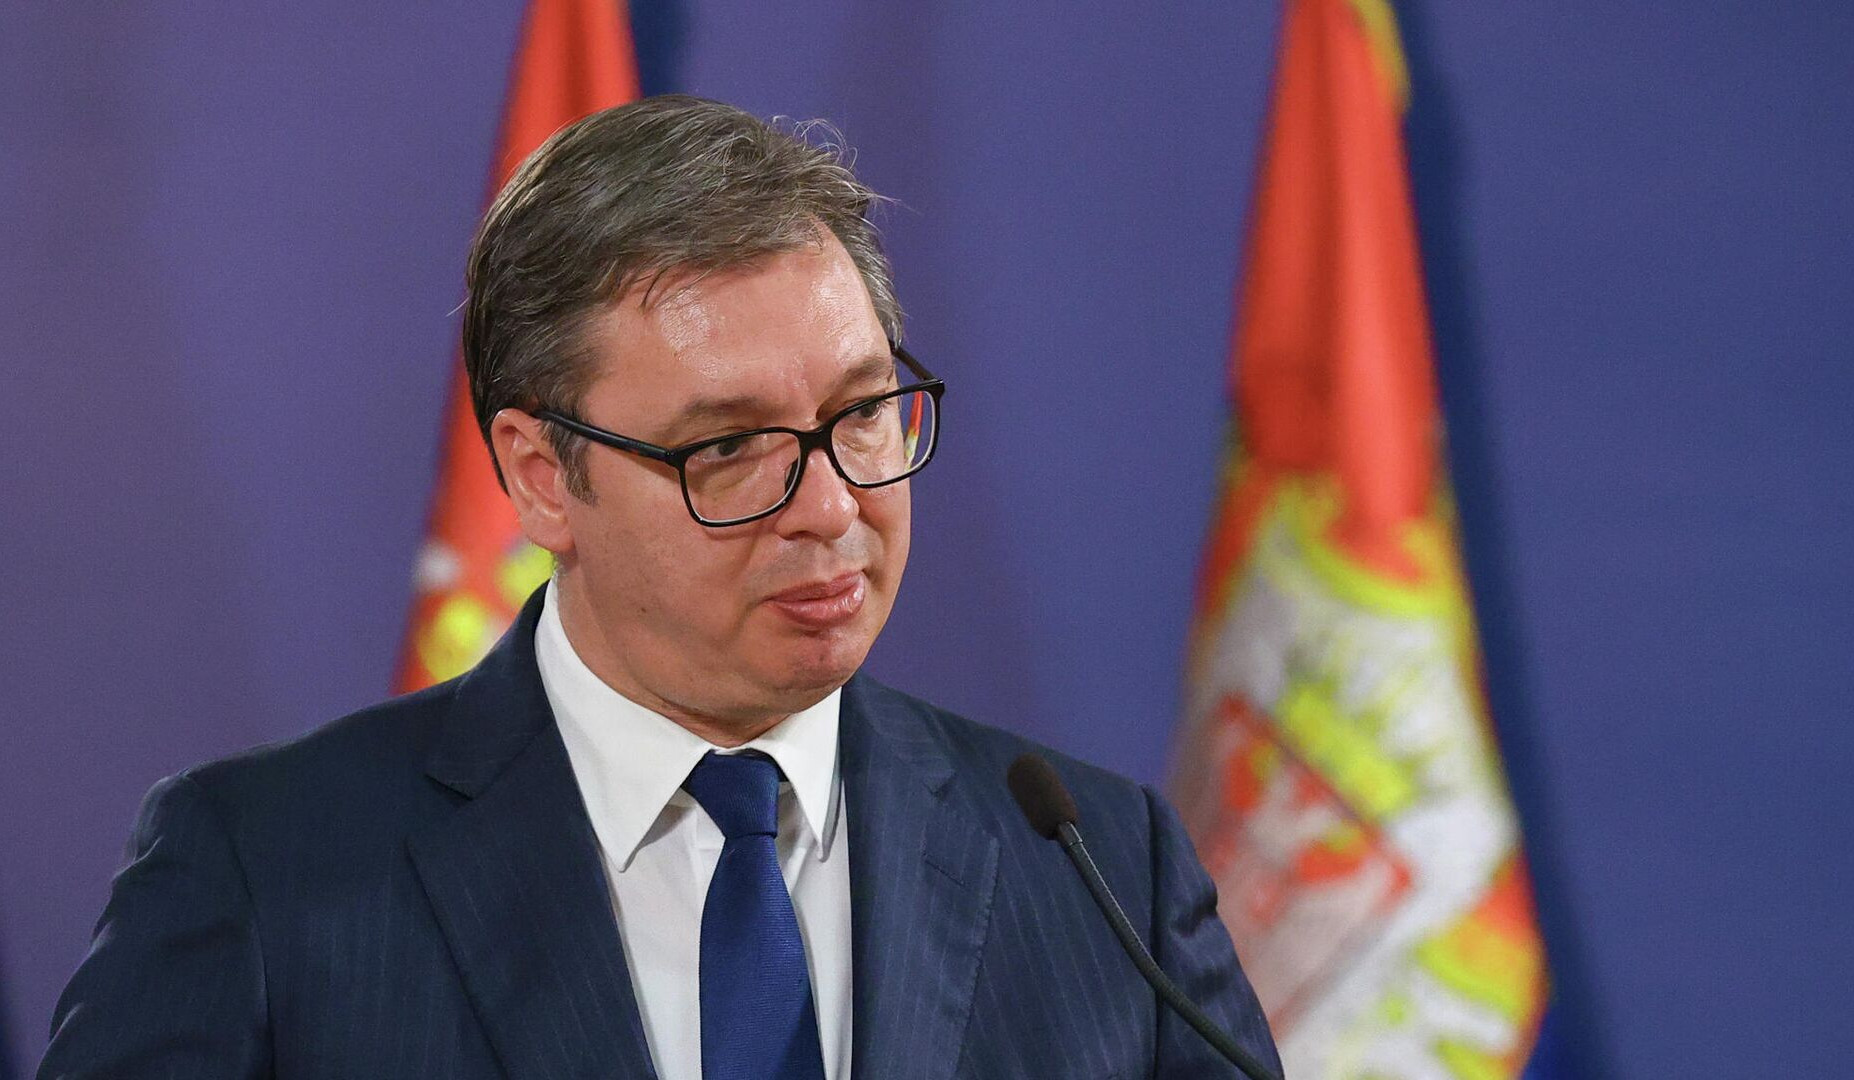 Western leaders threatened consequences if Kosovo deal not signed, says Serbia's Vucic